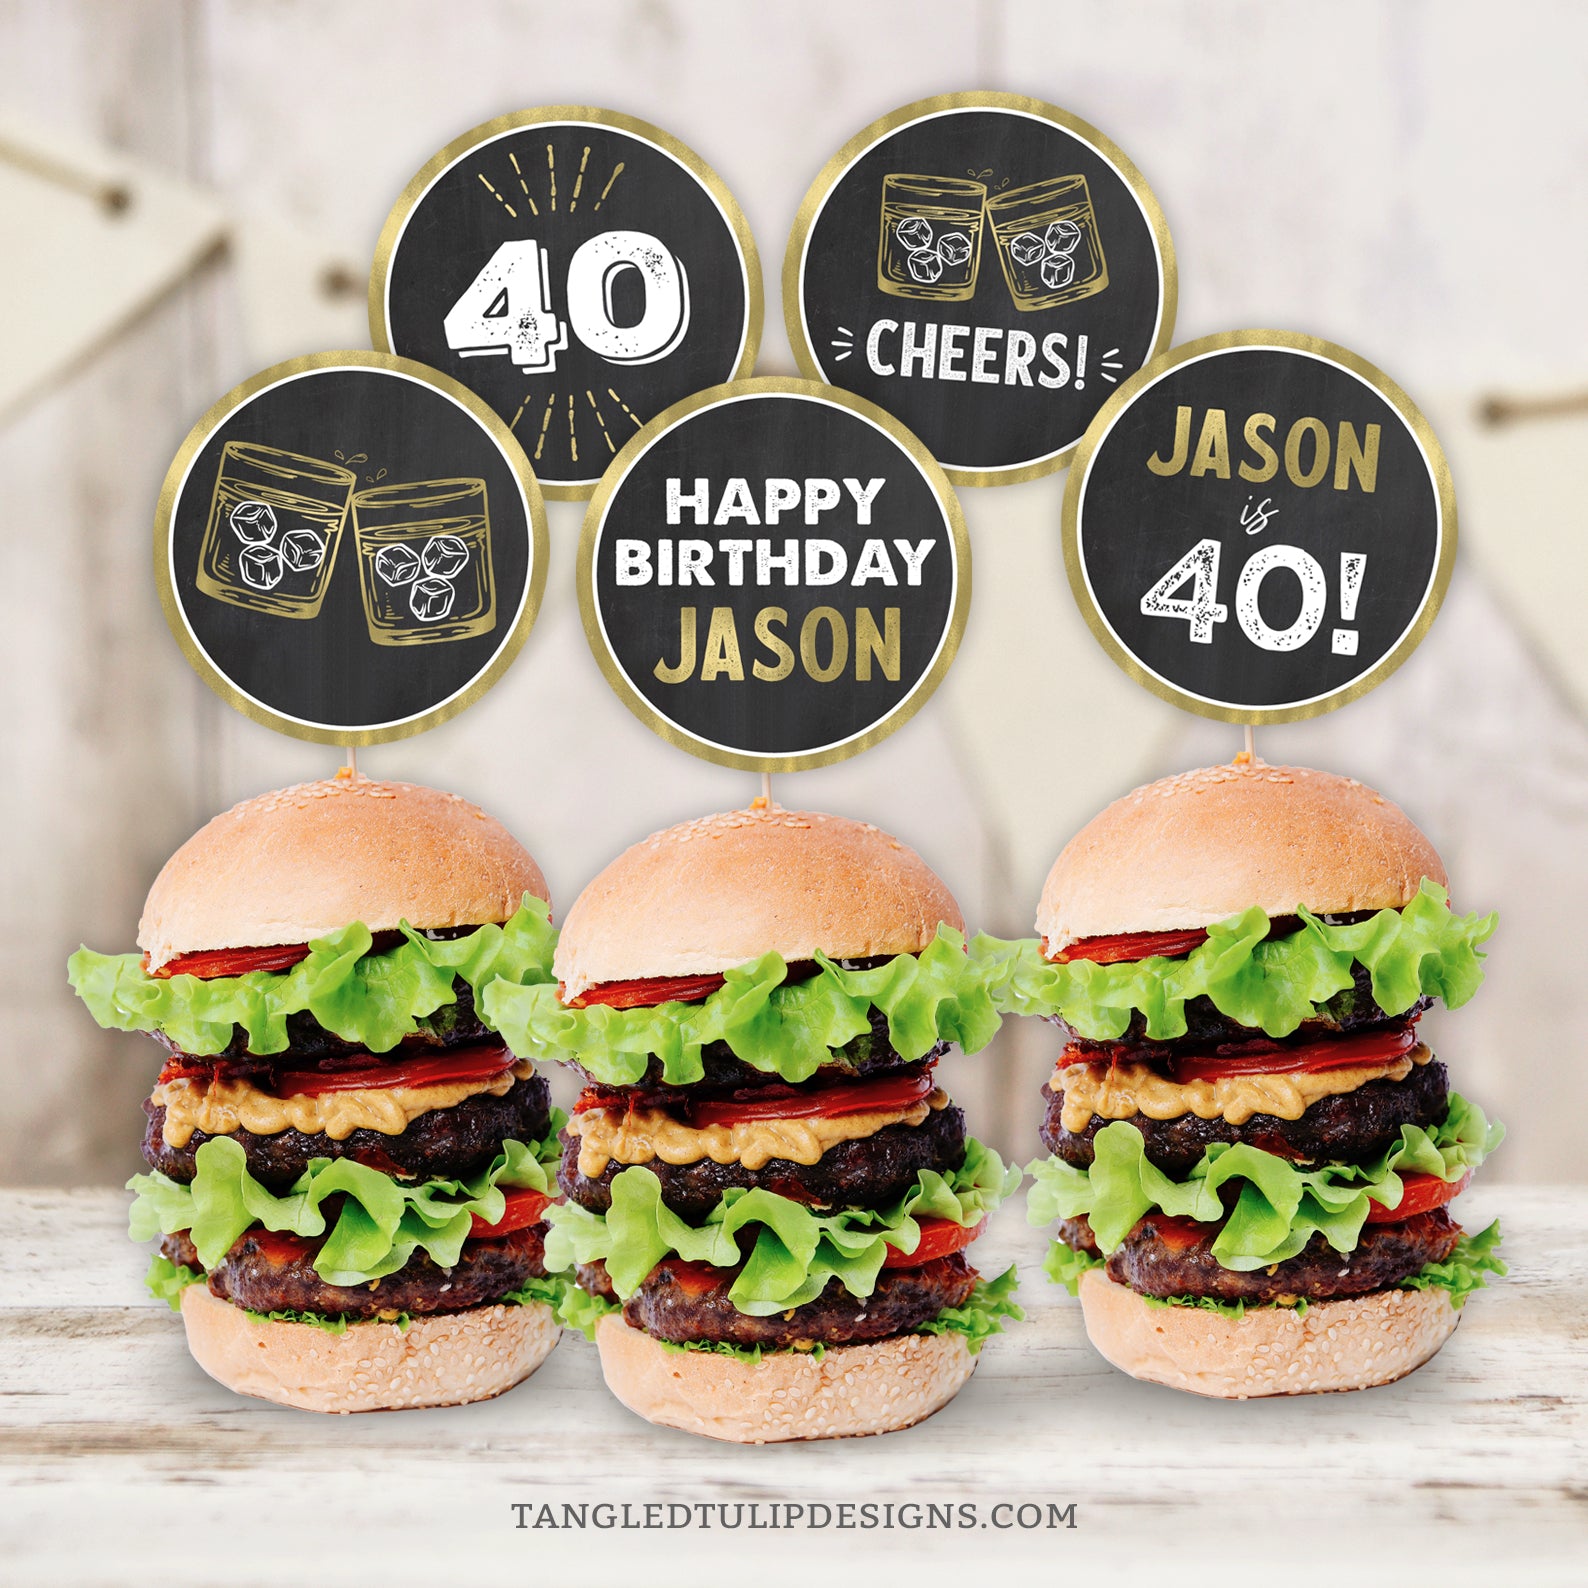 Editable Whiskey theme 40th Birthday Cupcake Toppers or Slider Toppers. Fully customizable, these toppers are gold and white on a classic chalkboard background, making them perfect for celebrating his 40th birthday, or for ANY AGE. By Tangled Tulip Designs.